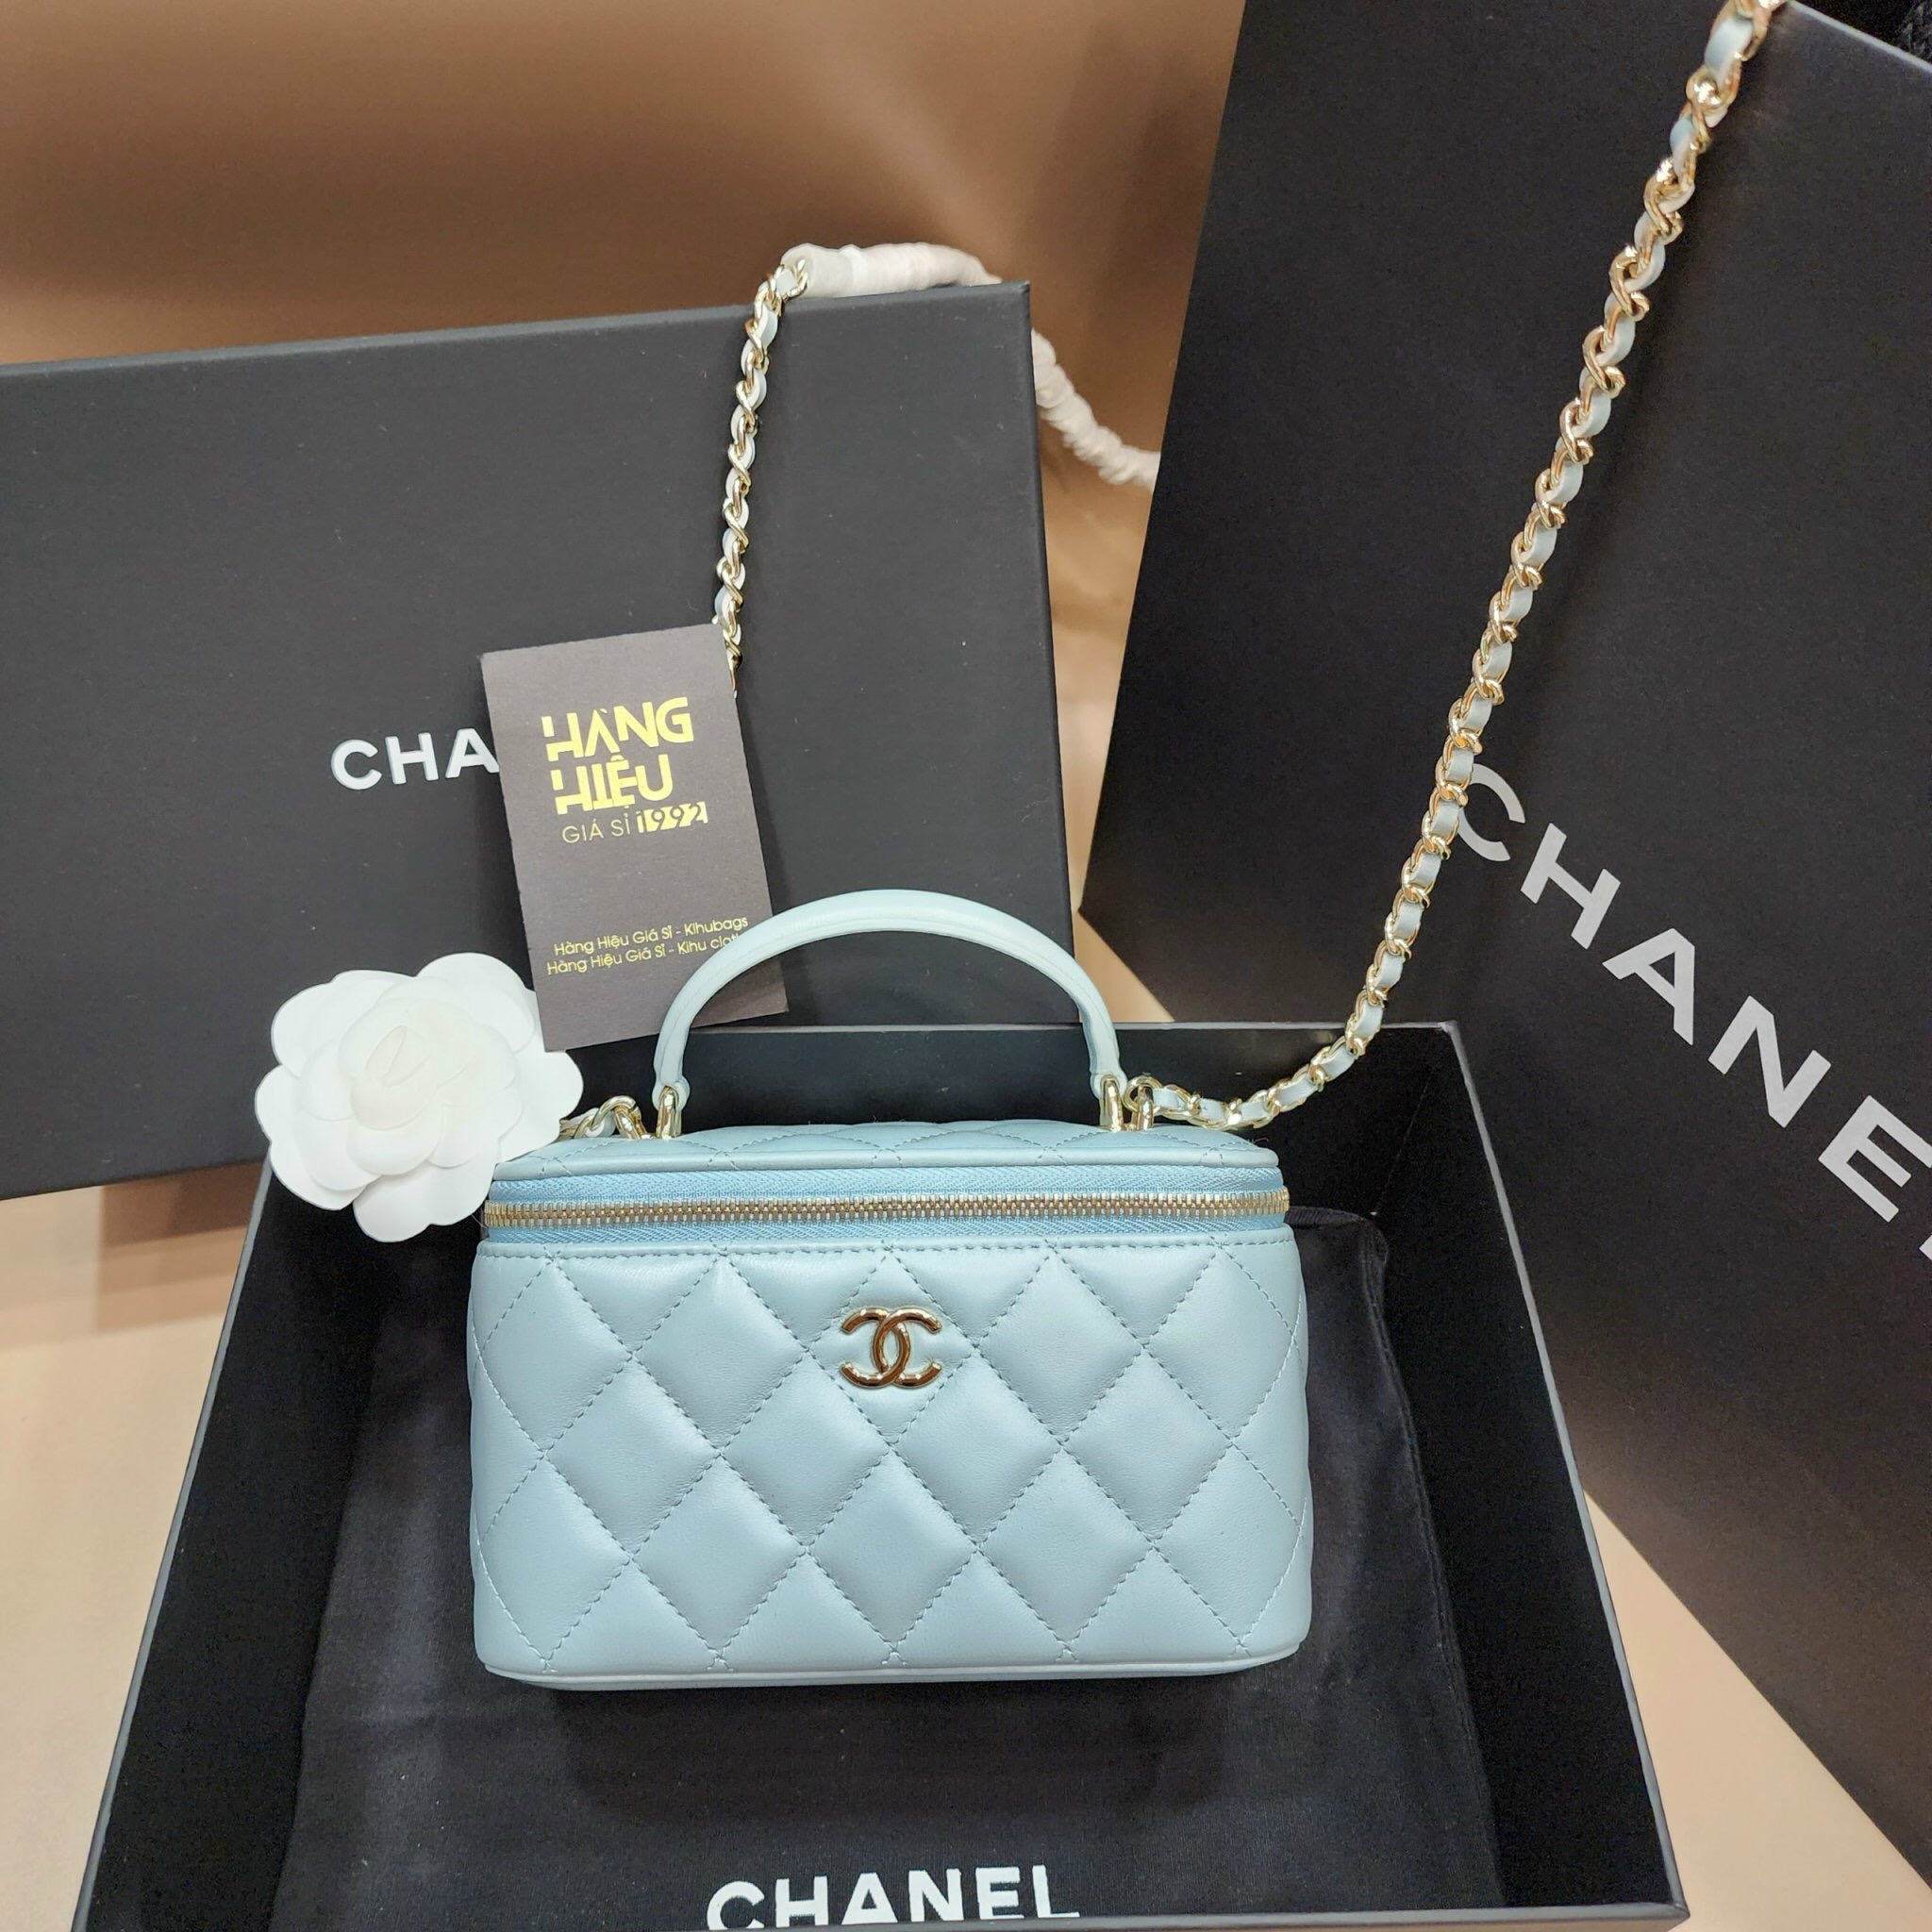 Why Chanel Vanity Bags Are Going To Be The ItBag This Year  niood